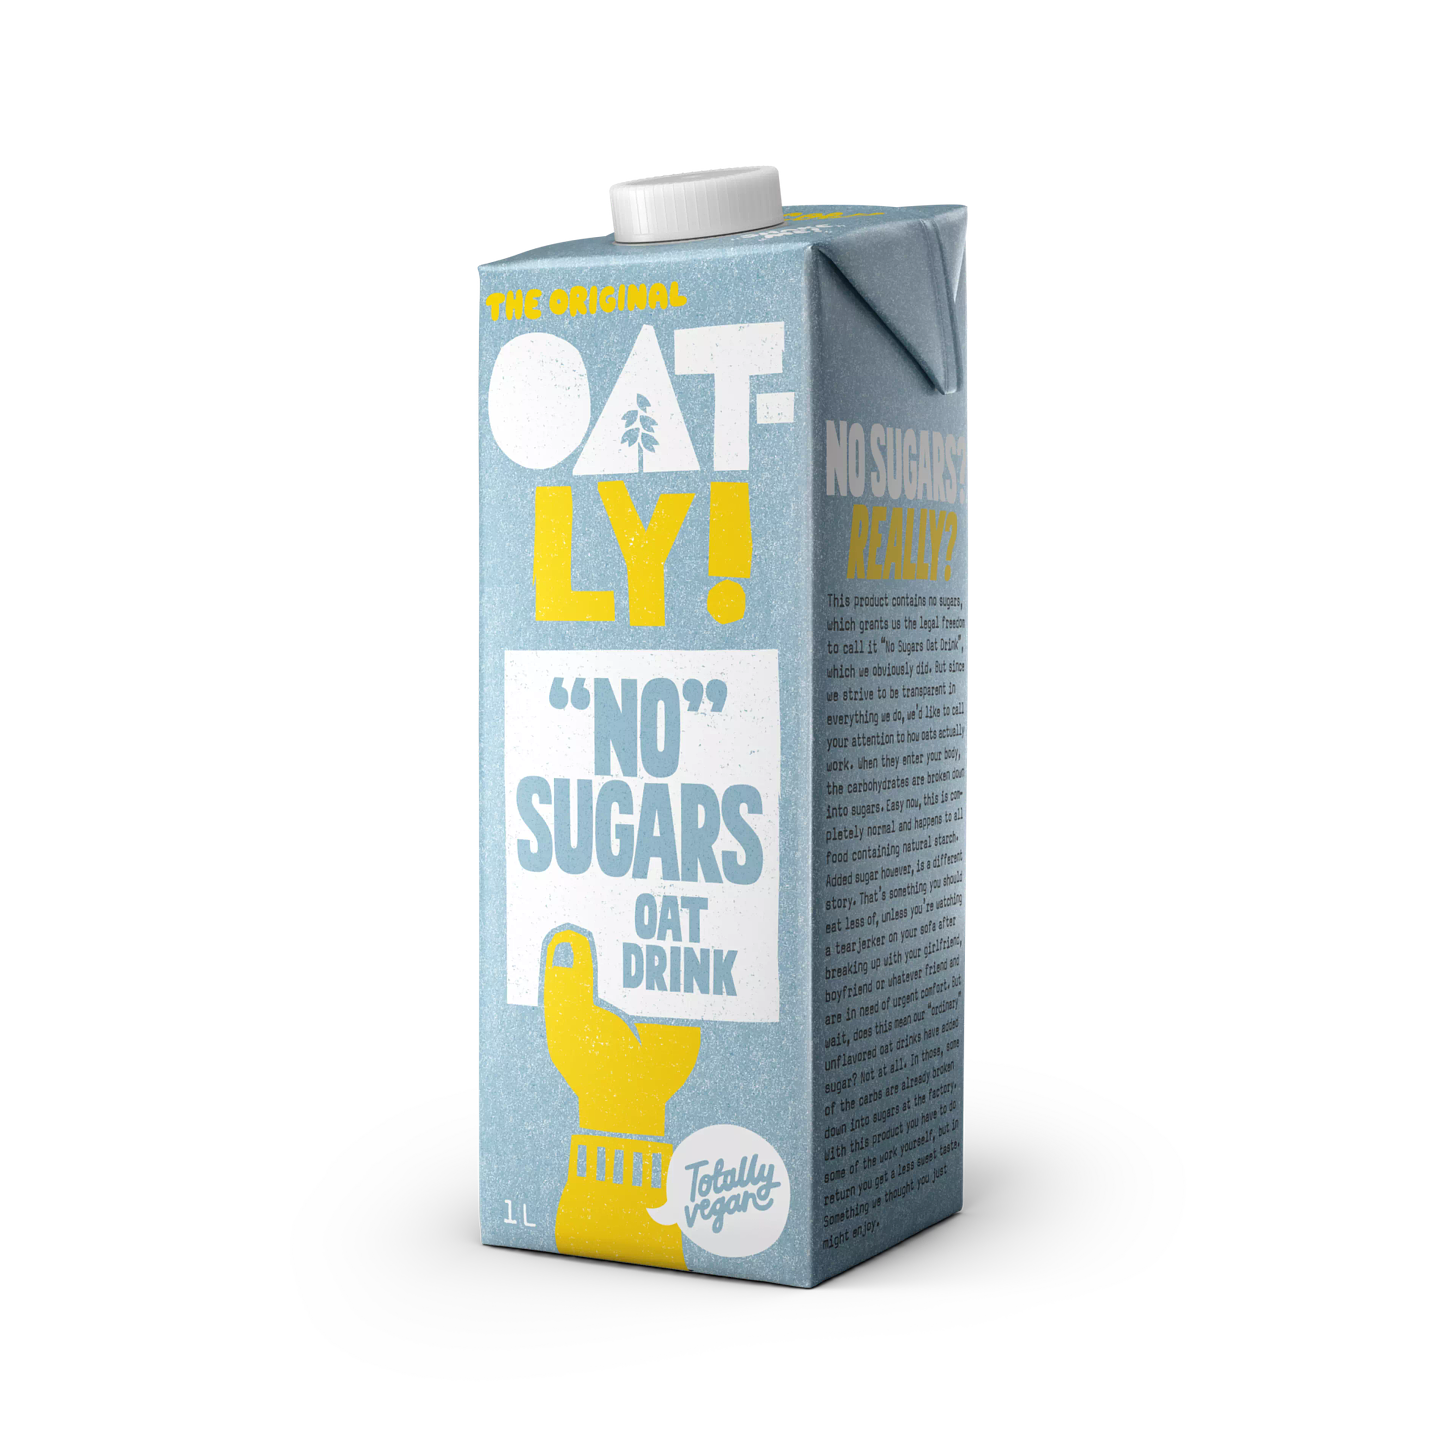 🥛Oatly Launches "No" Sugars Oat Drink & Commercial Strategy For 2023